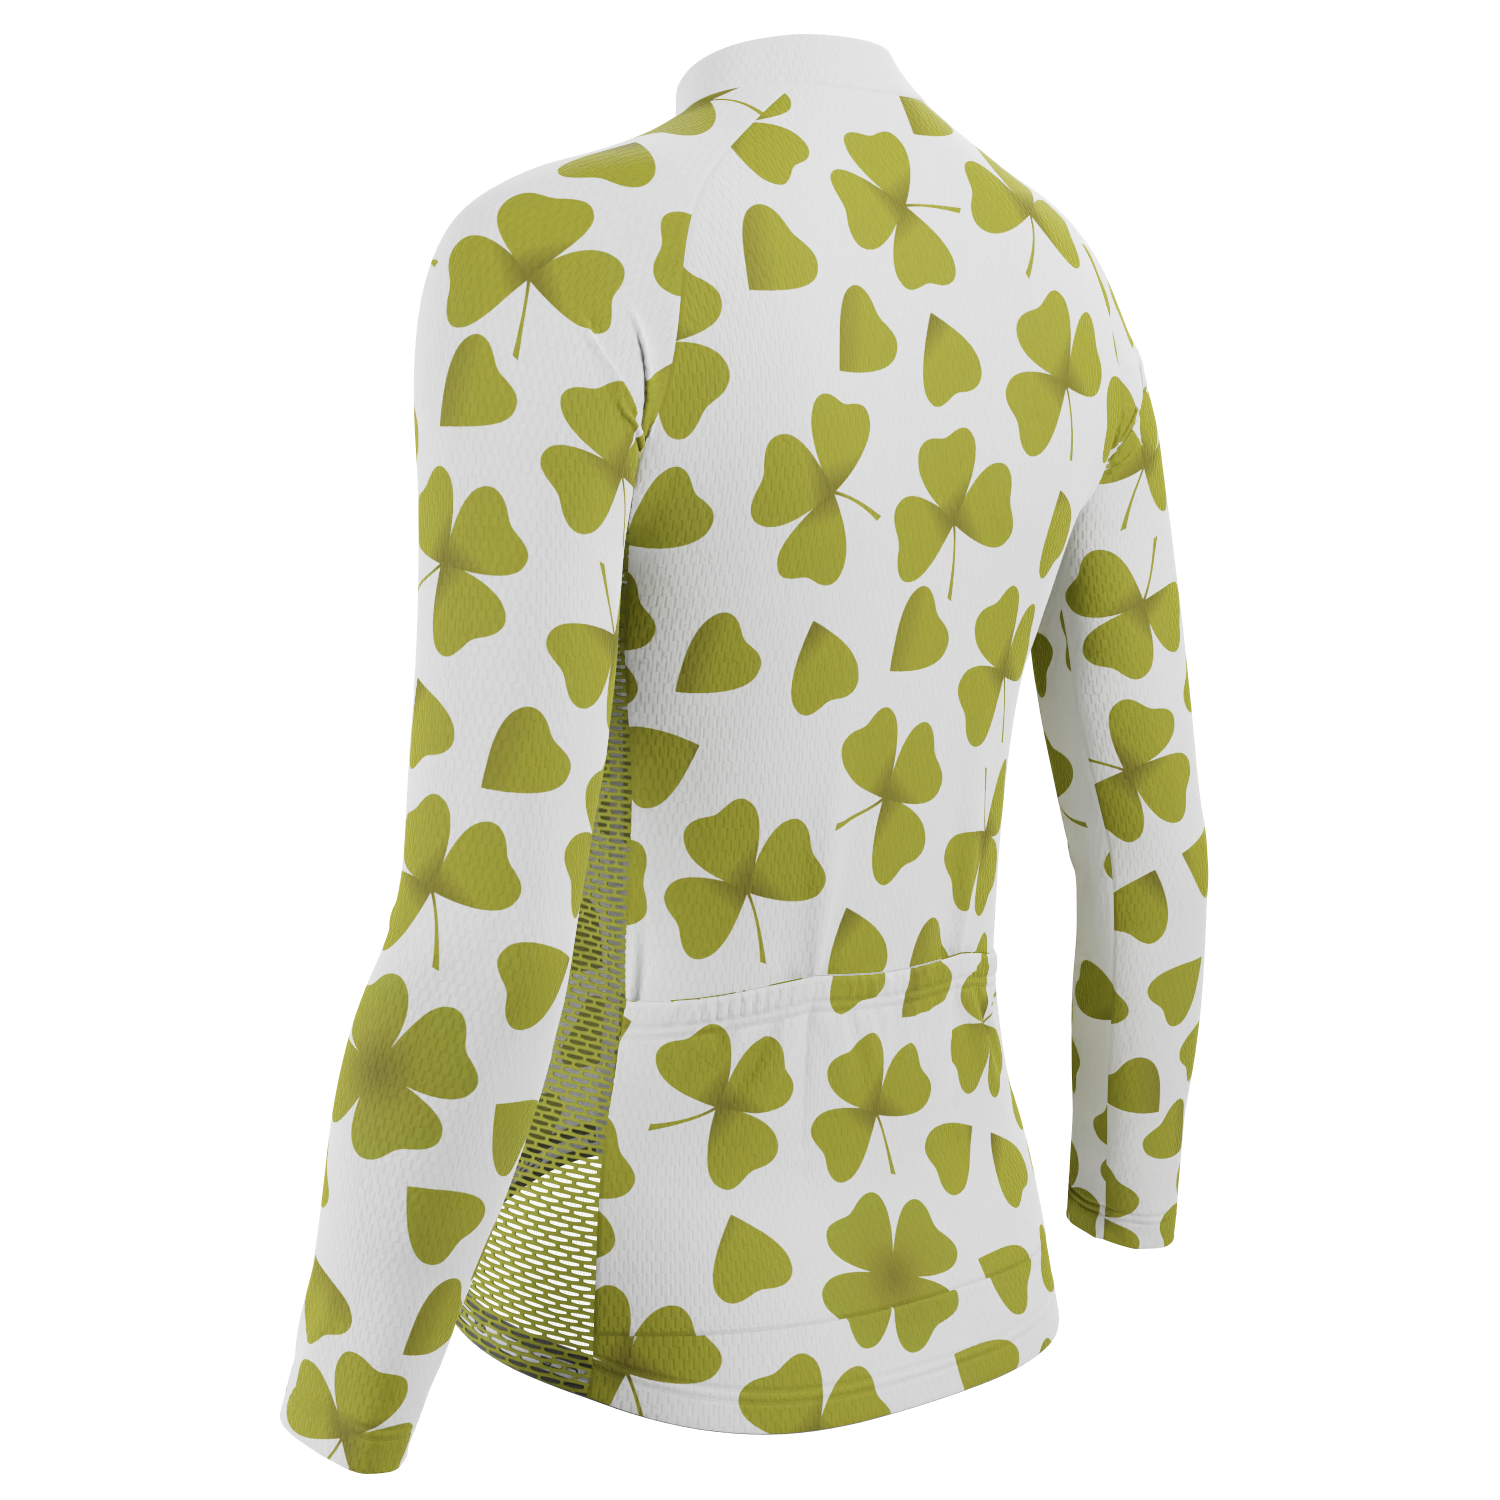 Women's Three Leaf Clover Long Sleeve Cycling Jersey